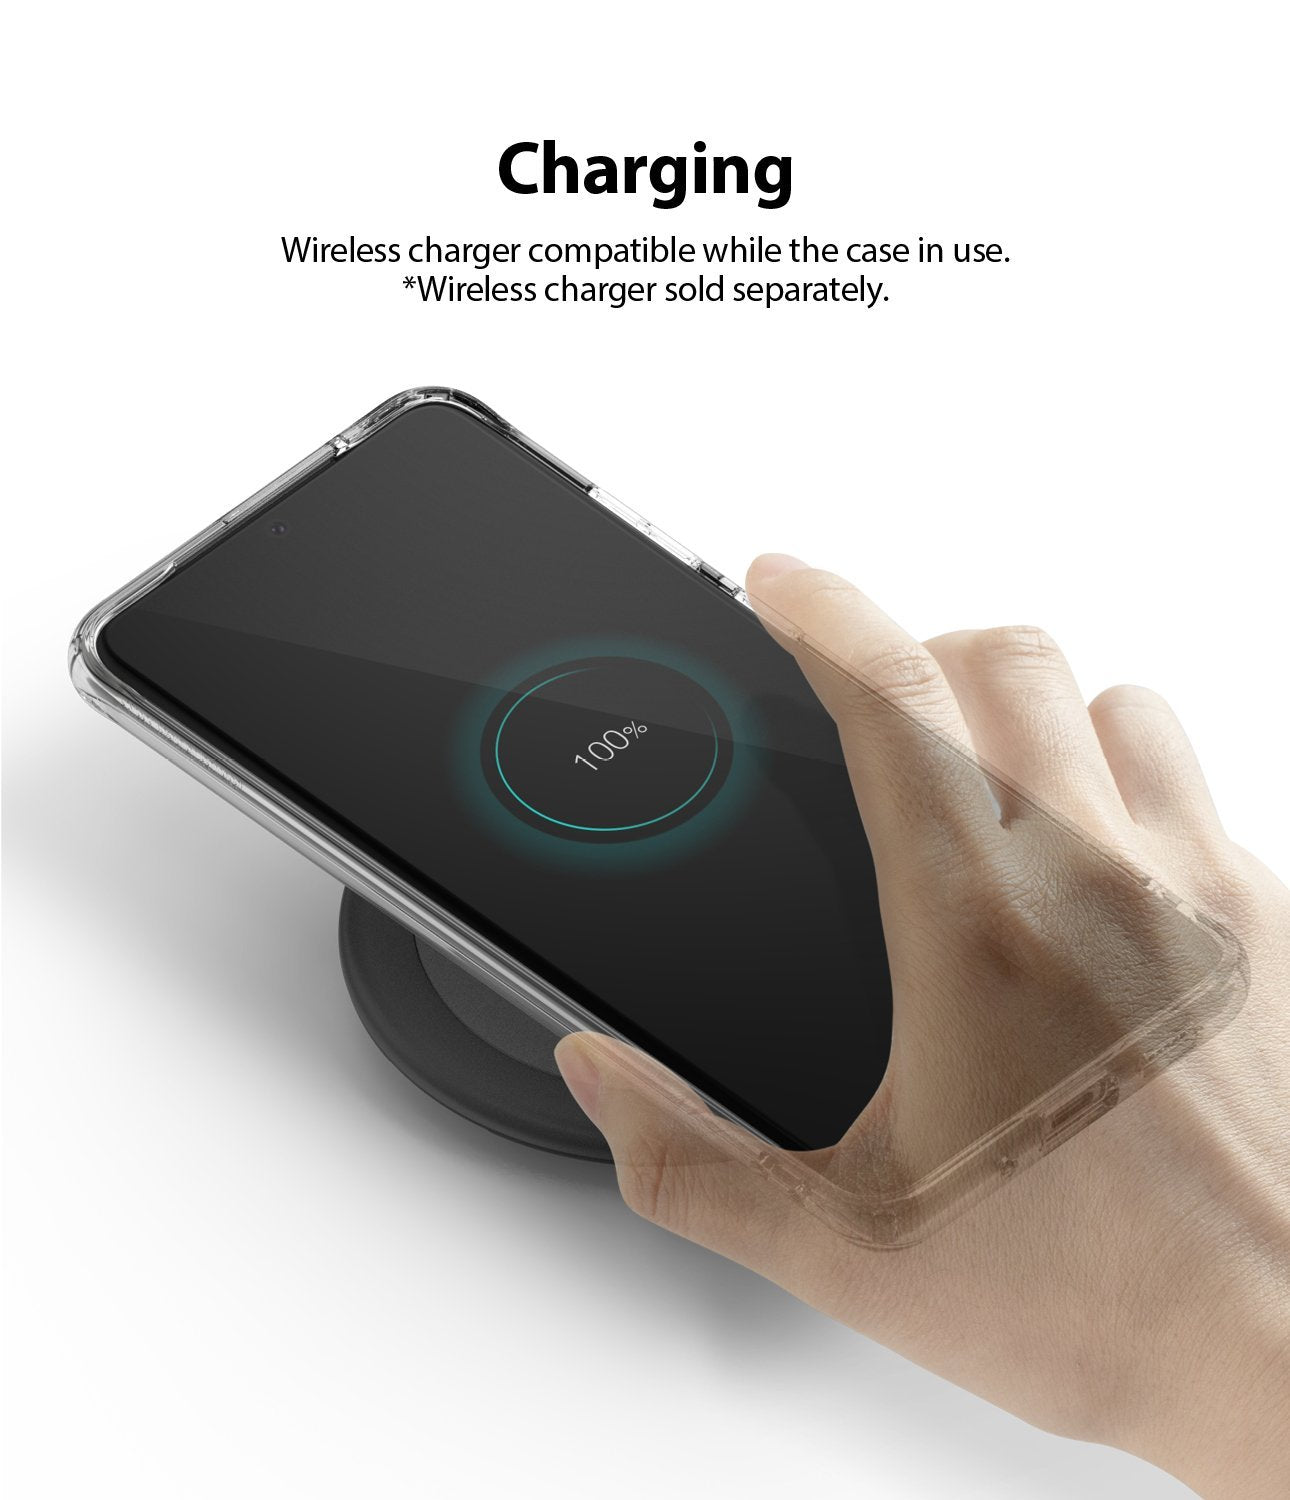 Ringke Galaxy S20 Ultra Case, Fusion, Charging, Wireless Charger Compatible